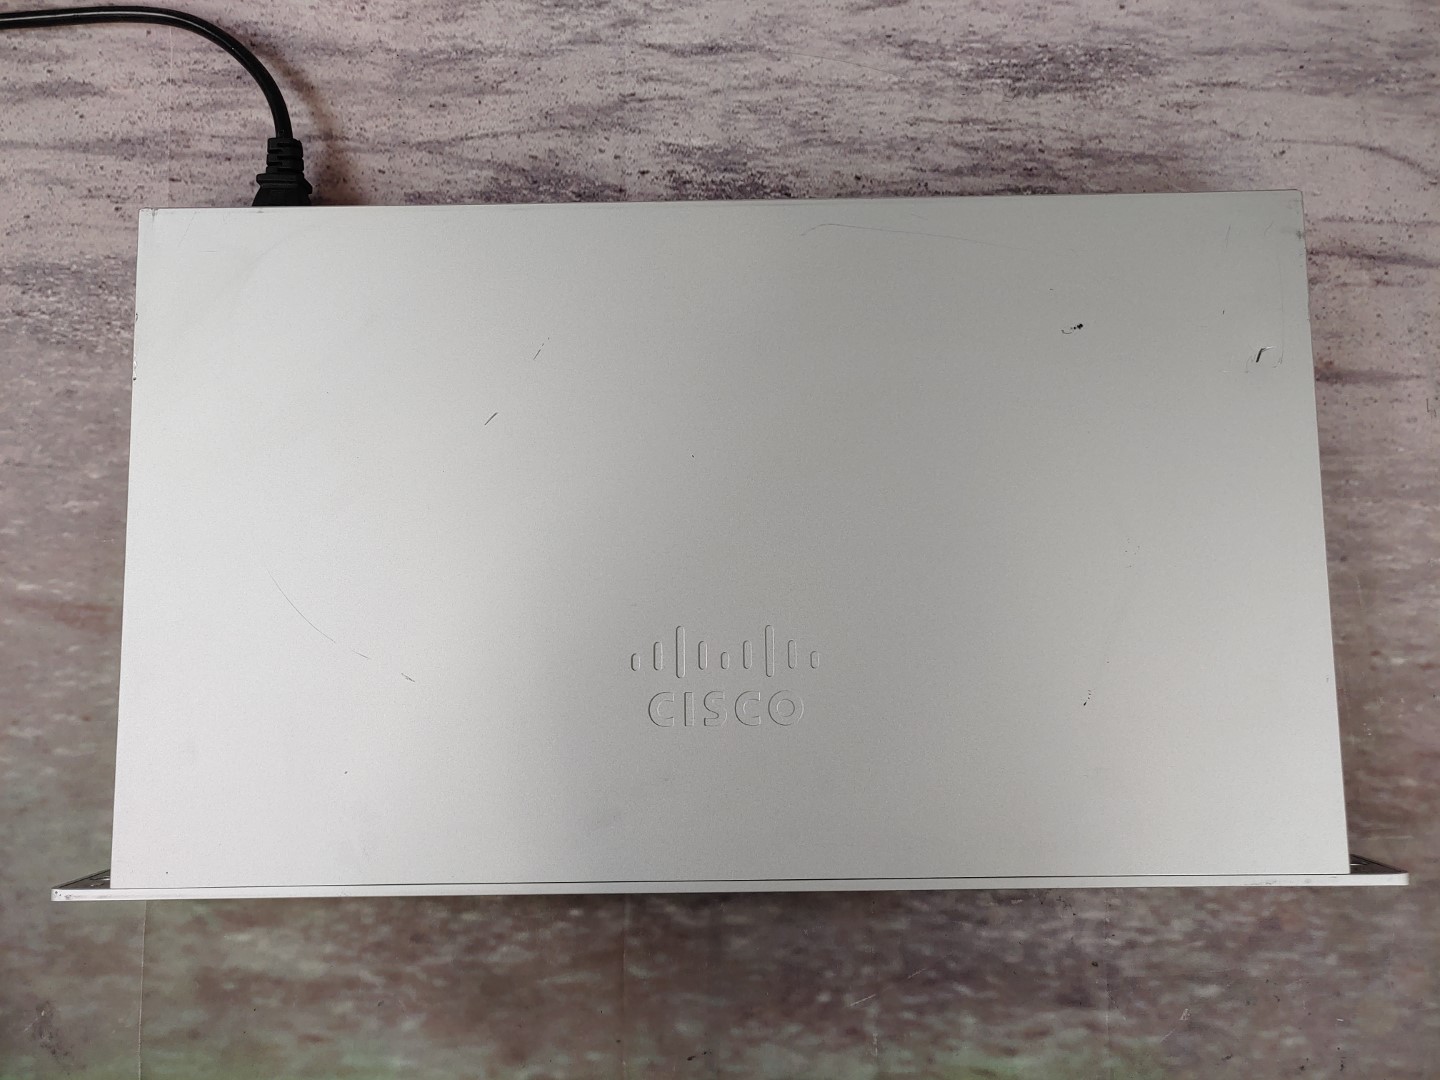 **UNCLAIMED** Good Condition! Tested and Pulled from a working environment! May have minor scratches/scuffs from normal use. **POWERCORD INCLUDED**  ((BDSA))Item Specifics: MPN : MX84-HWUPC : N/AType : FirewallForm Factor : Rack-MountableBrand : CISCO MerakiModel : MX84-HW - 2